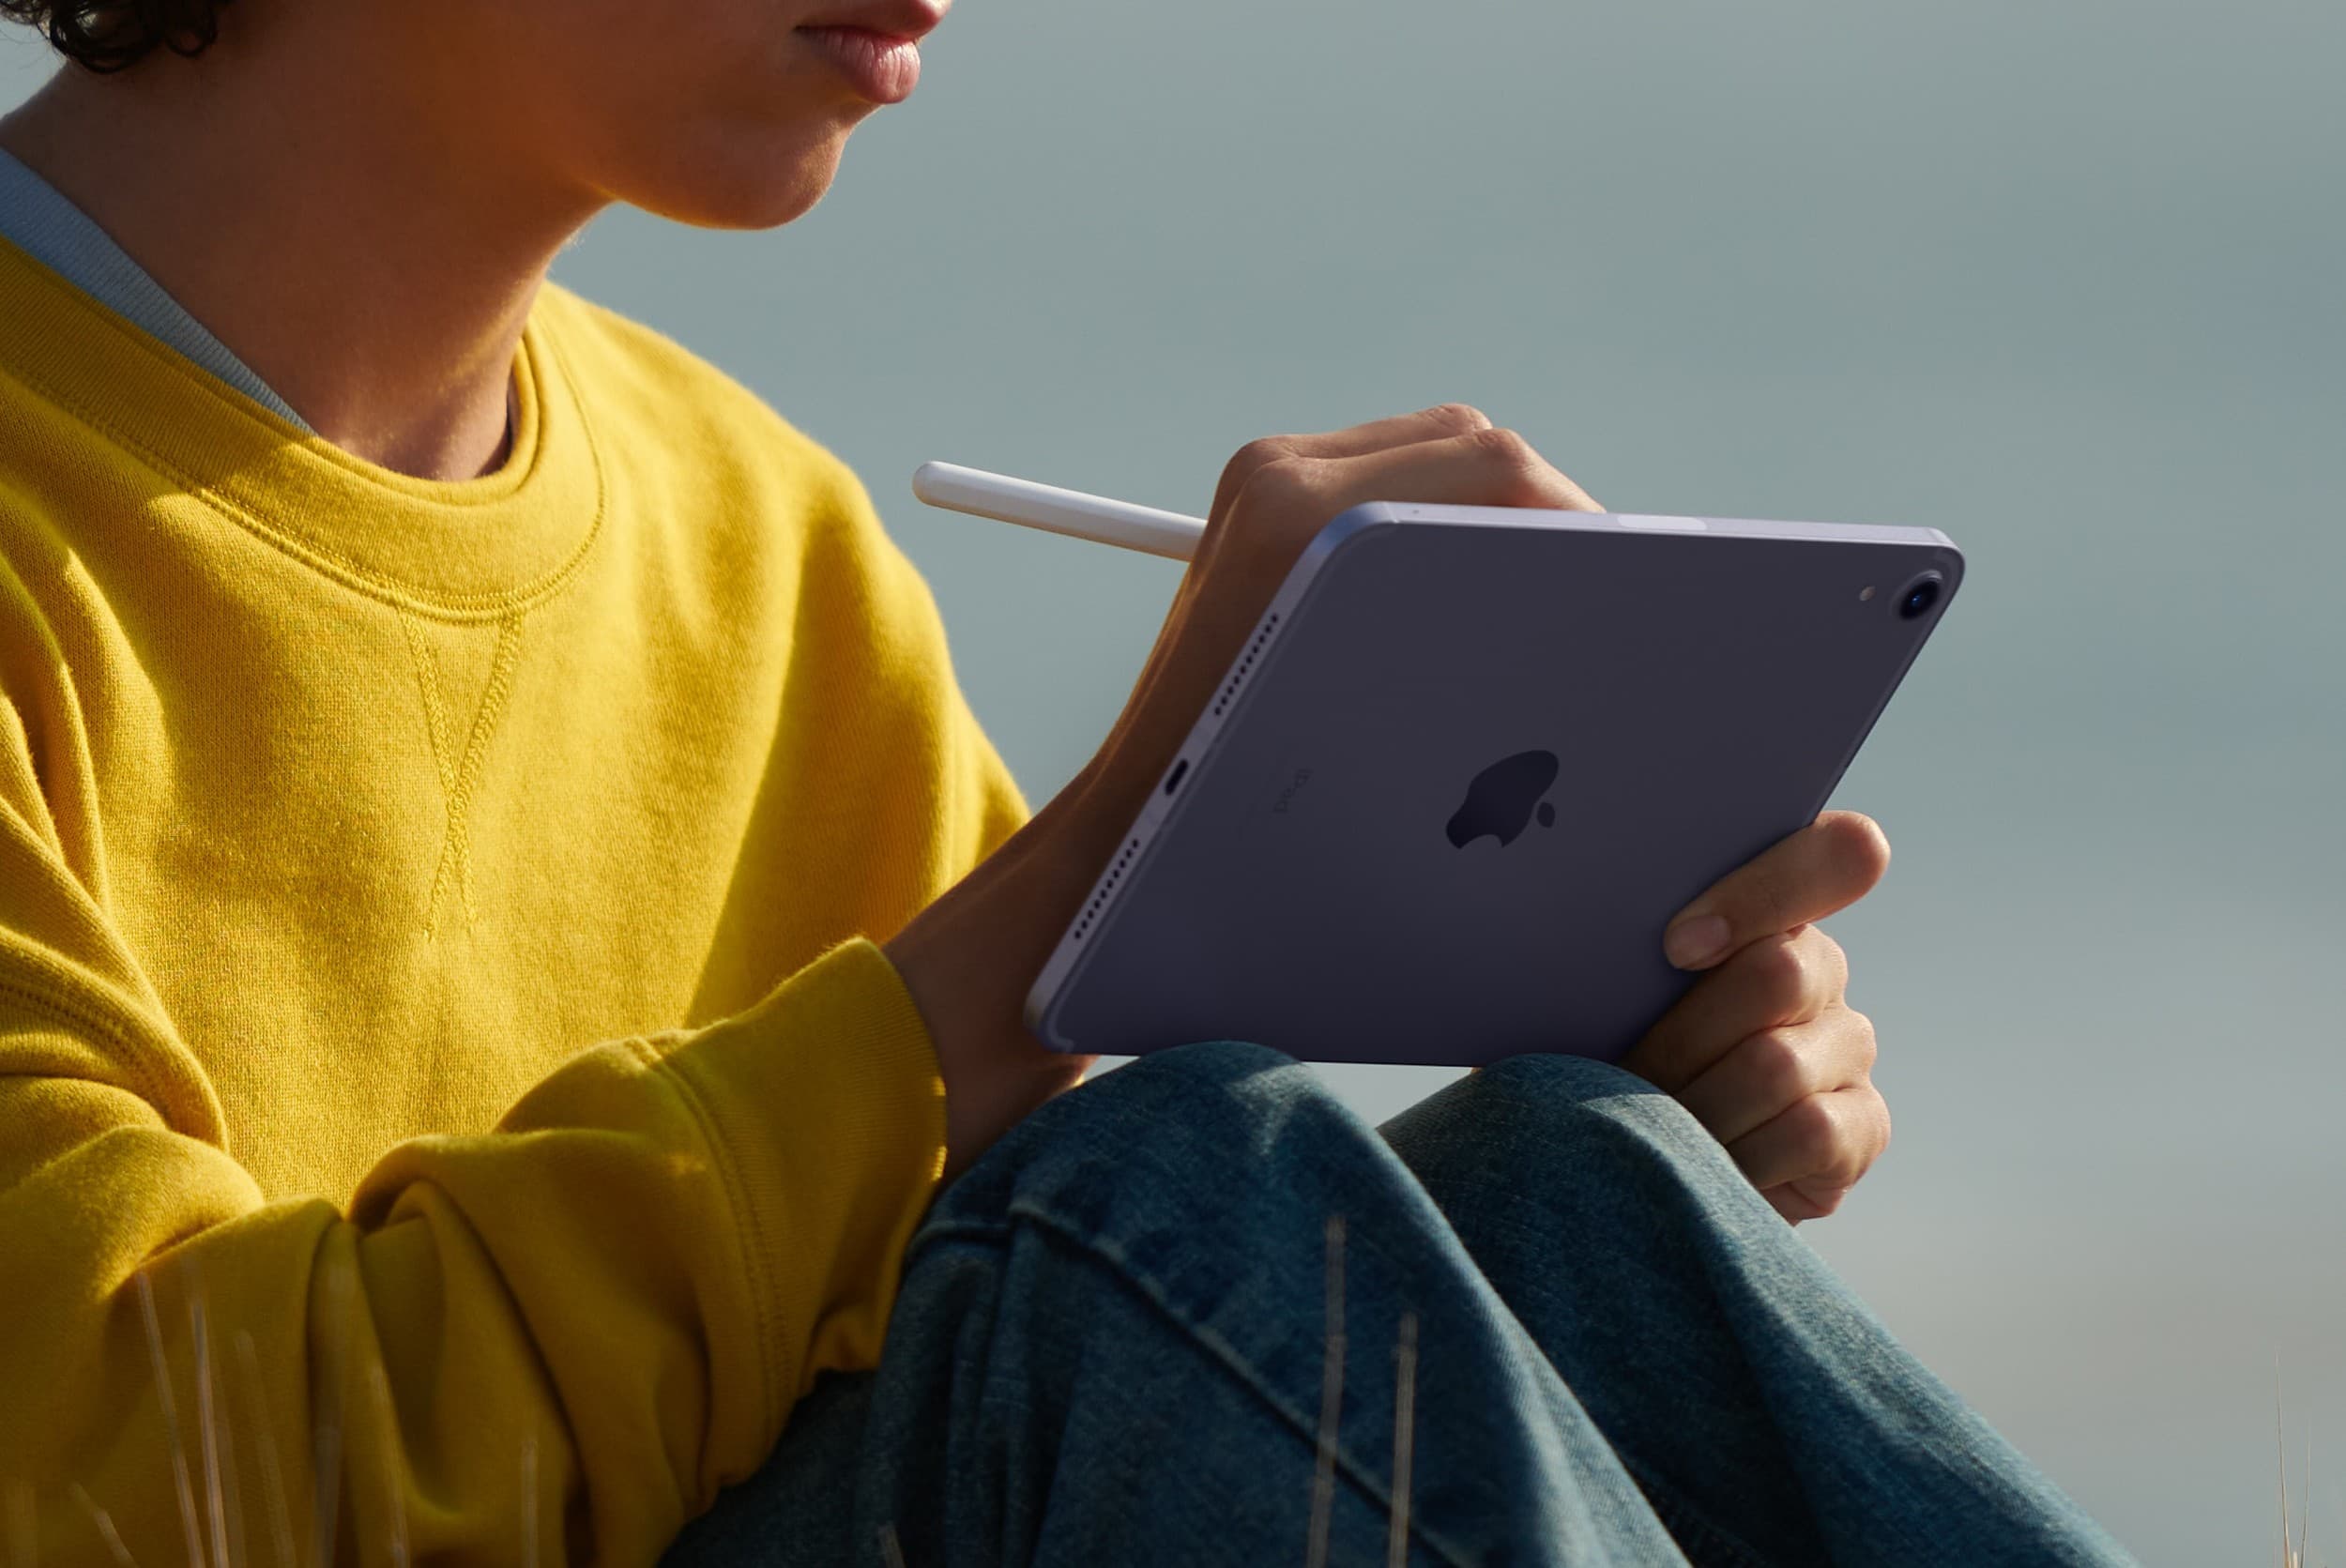 Apple wants to move some iPad production to India to reduce dependence on China